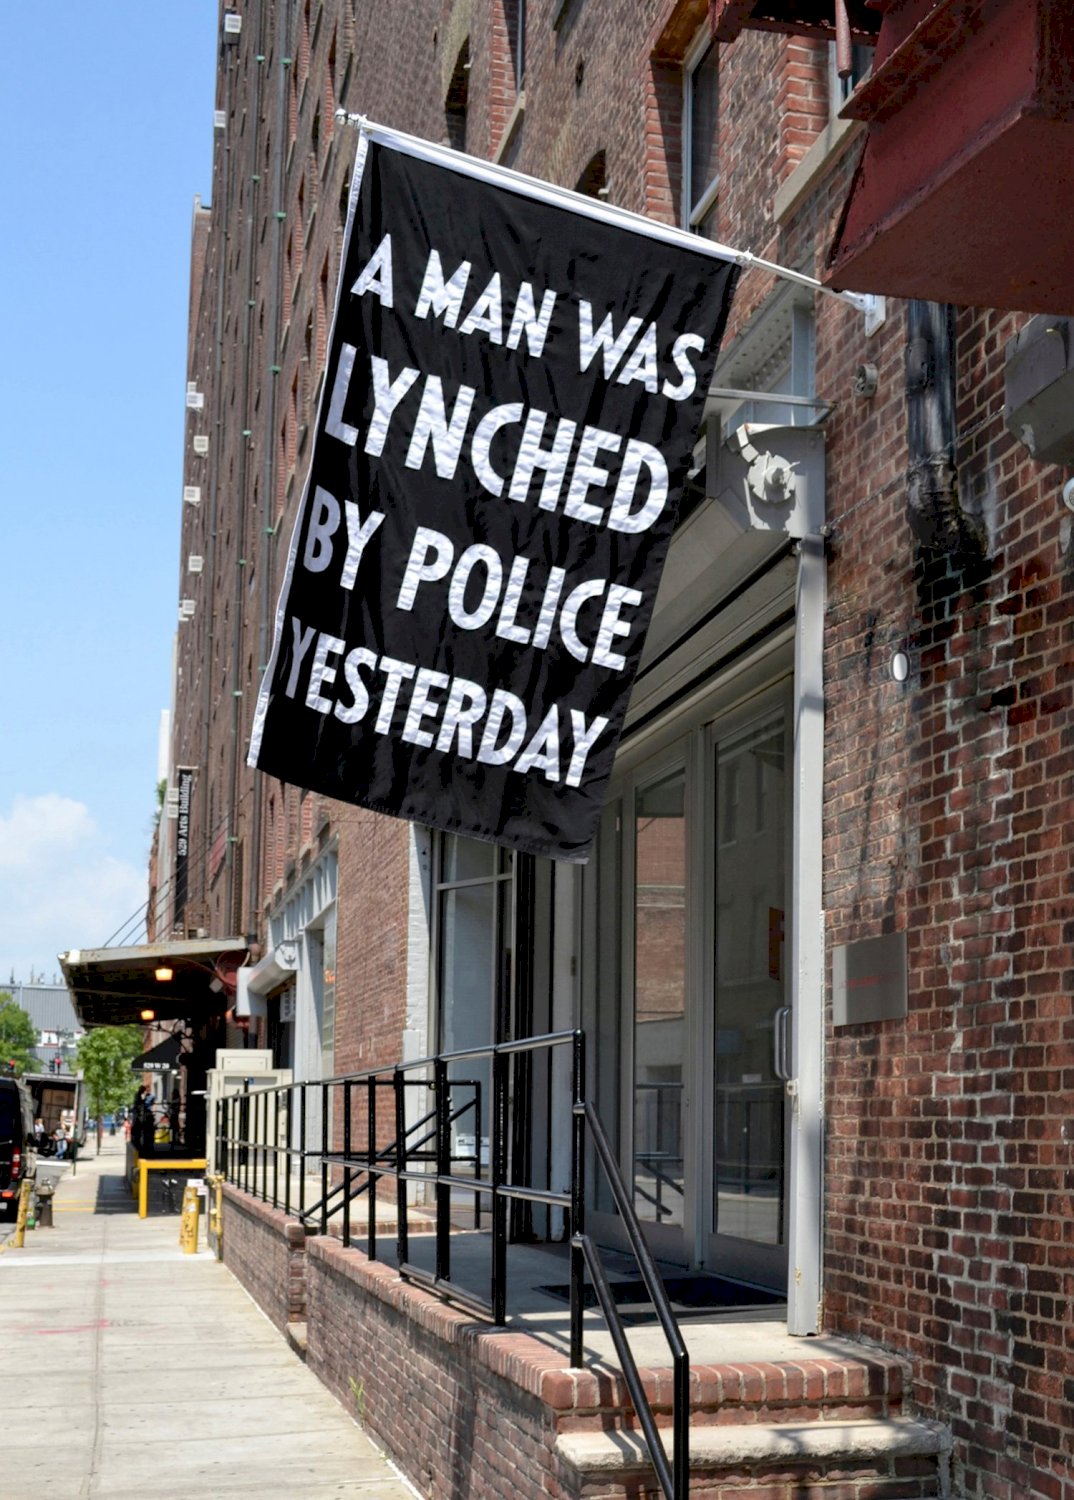 A Man Was Lynched by Police Yesterday